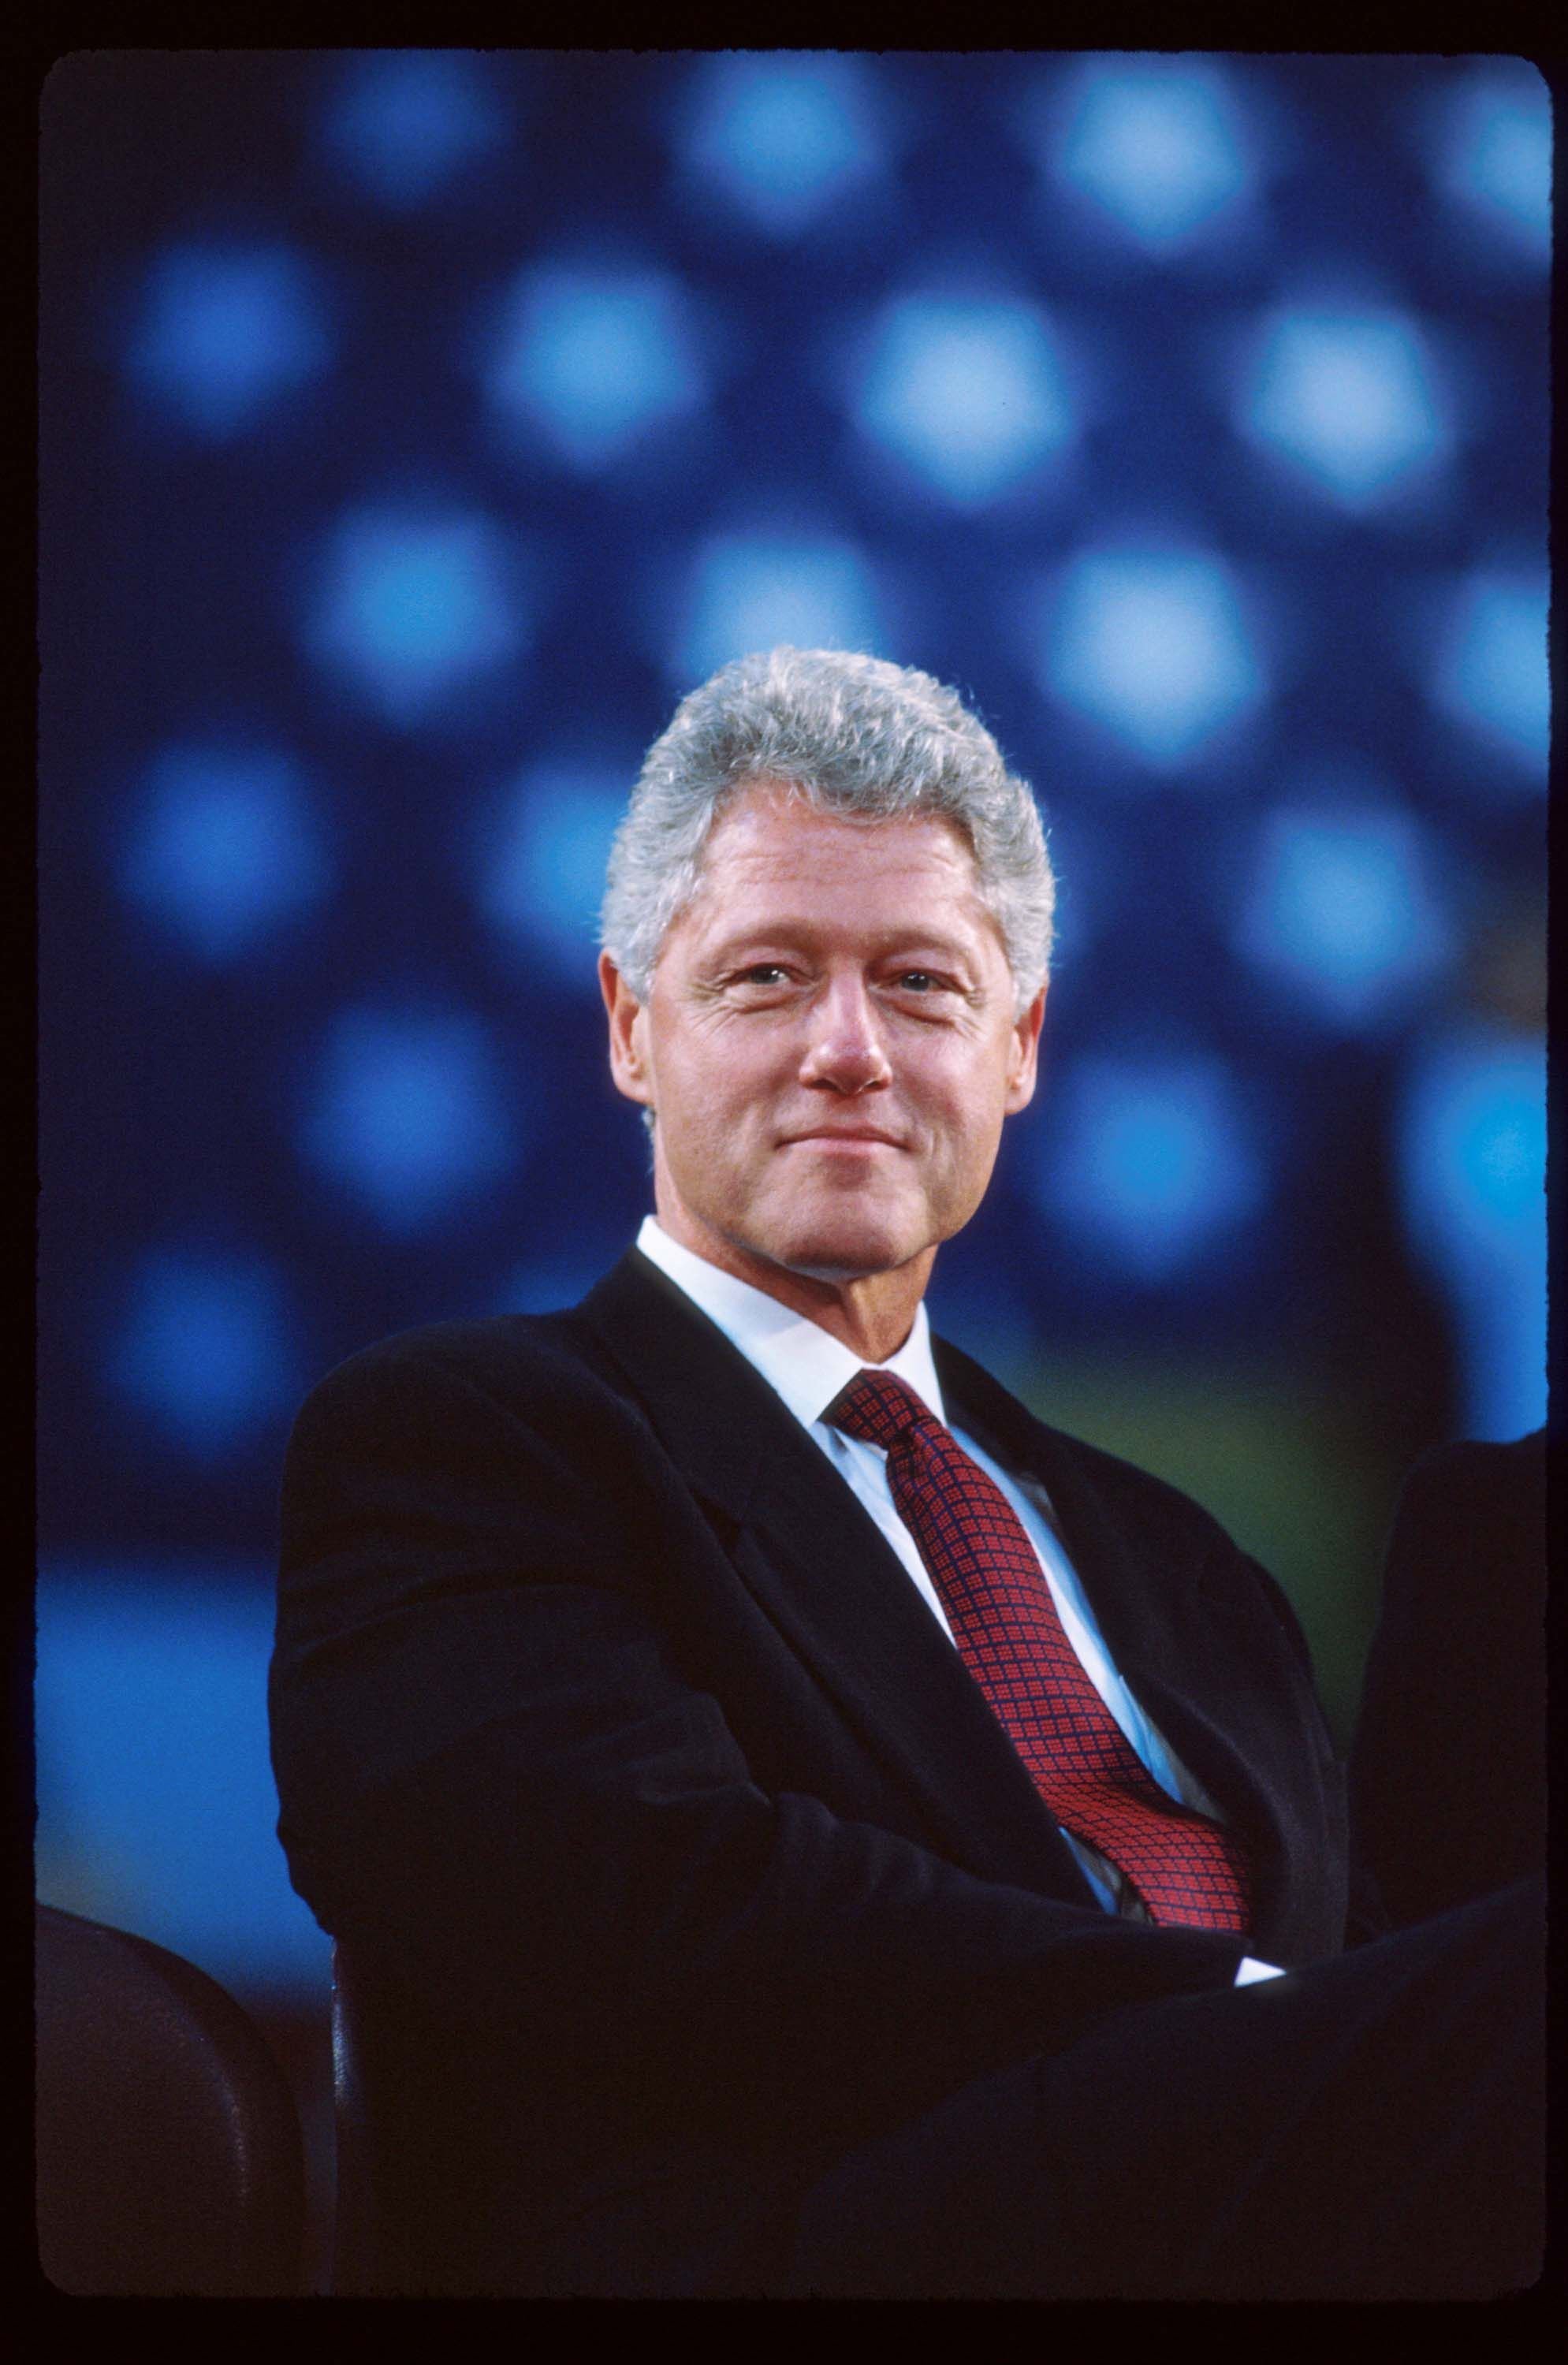 President Bill Clinton posing in New Jersey on November 3, 1997 | Photo: Cynthia Johnson/Liaison/Getty Images